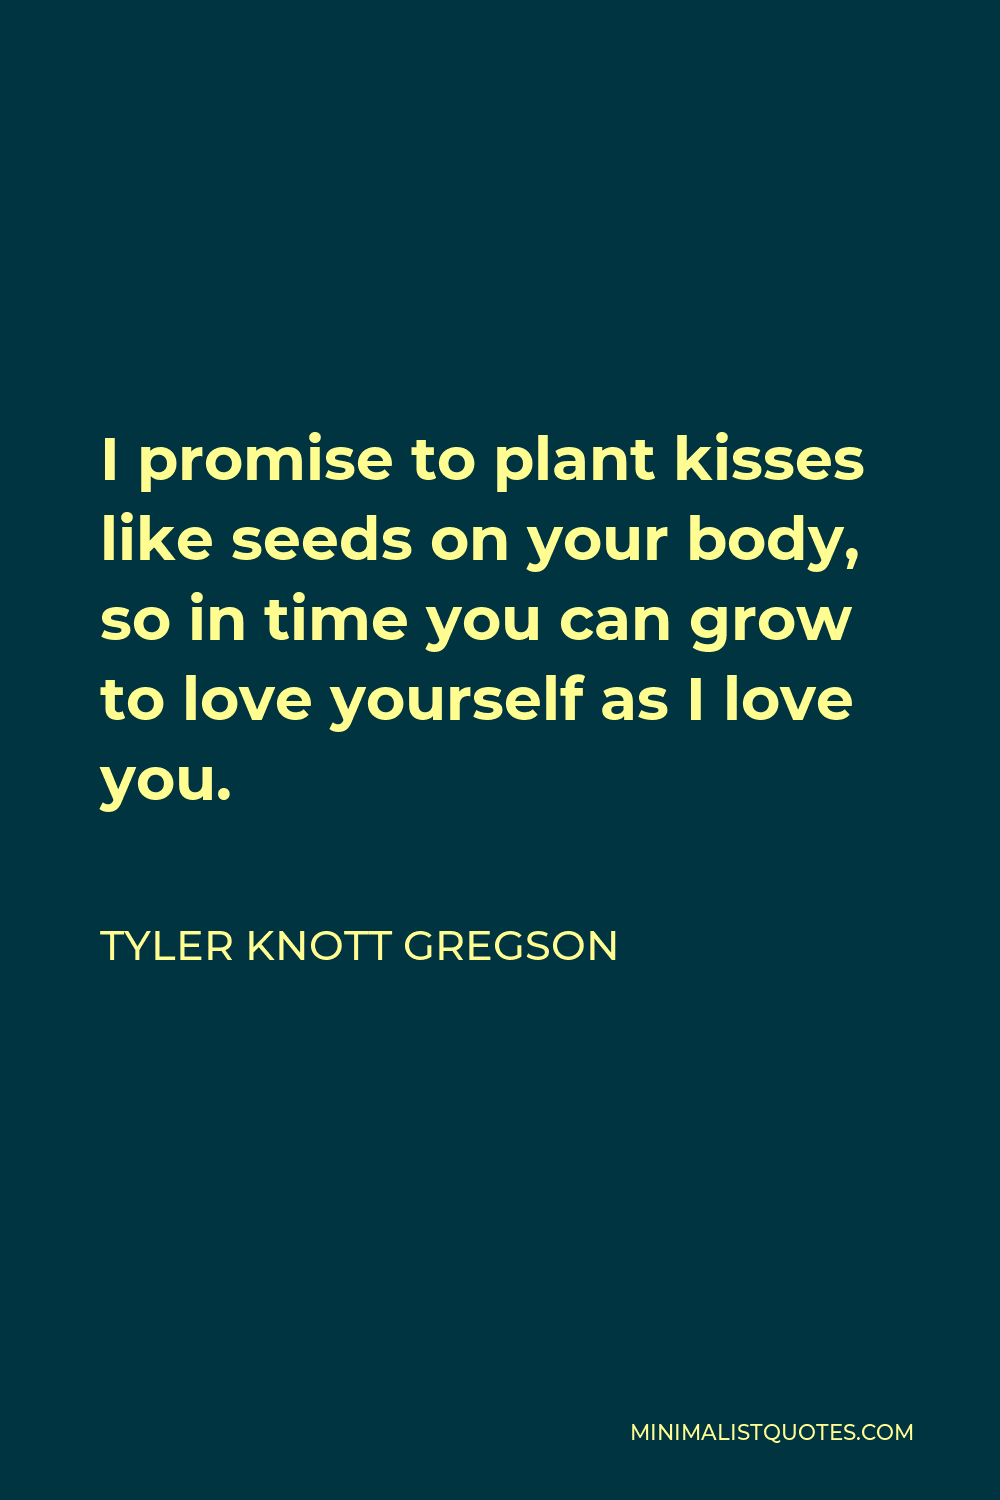 Tyler Knott Gregson Quote - I promise to plant kisses like seeds on your body, so in time you can grow to love yourself as I love you.